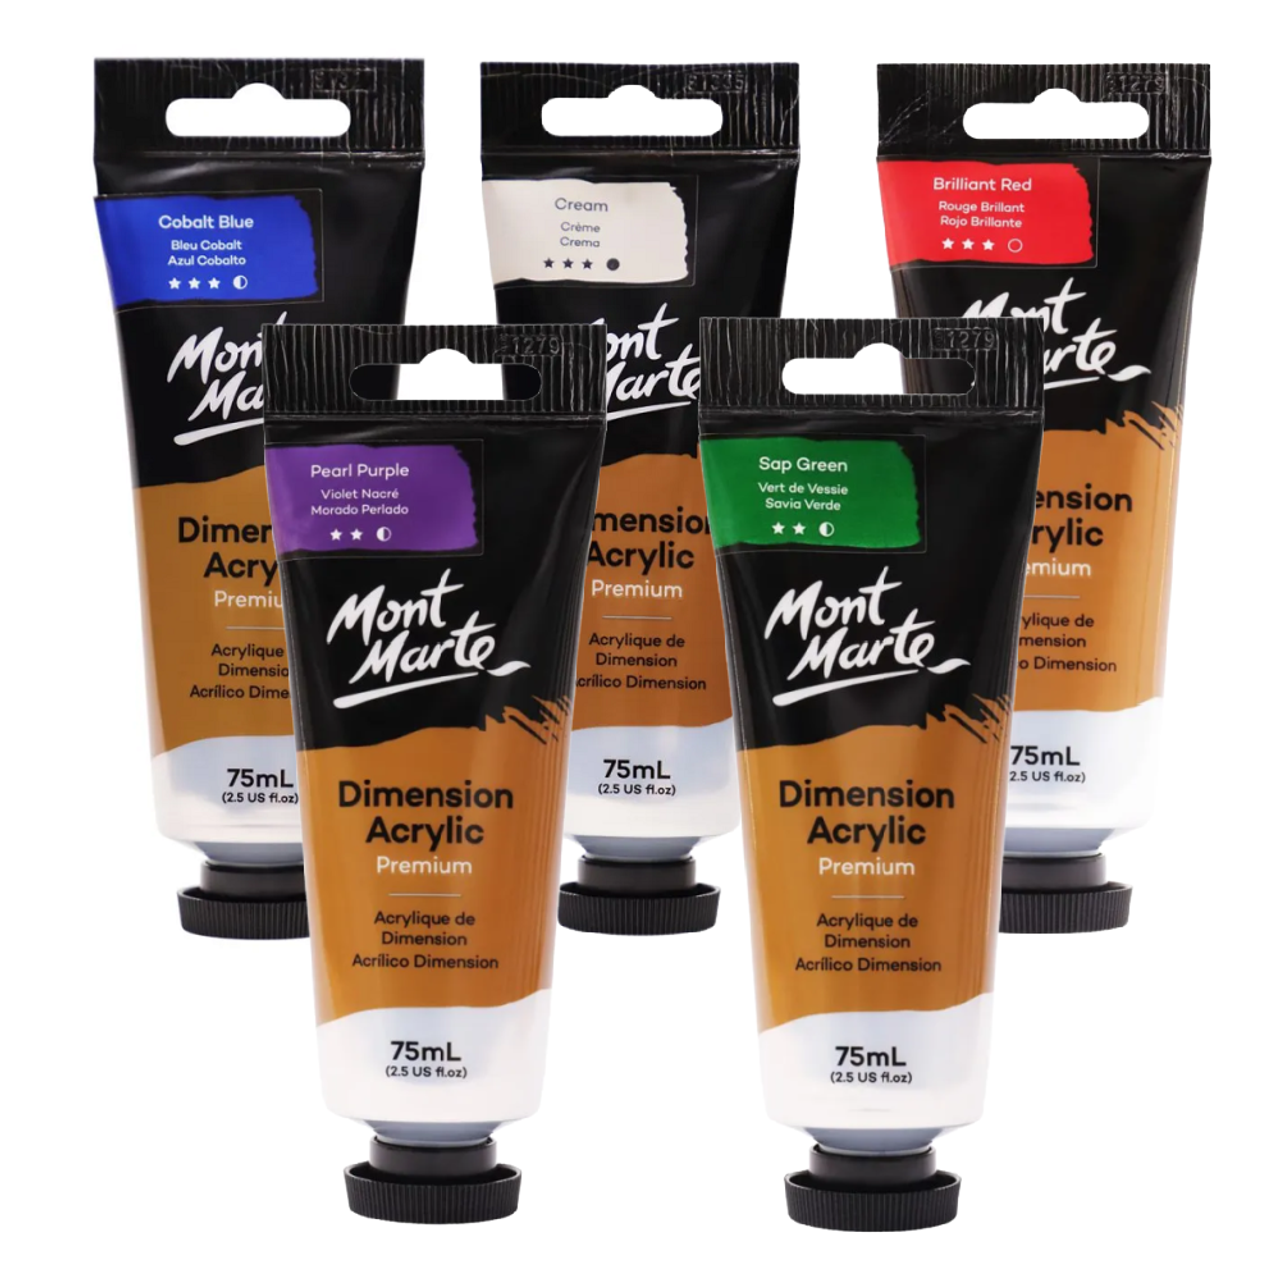 Mont Marte Acrylic Paint Monstral Green 75ml - Red Dot